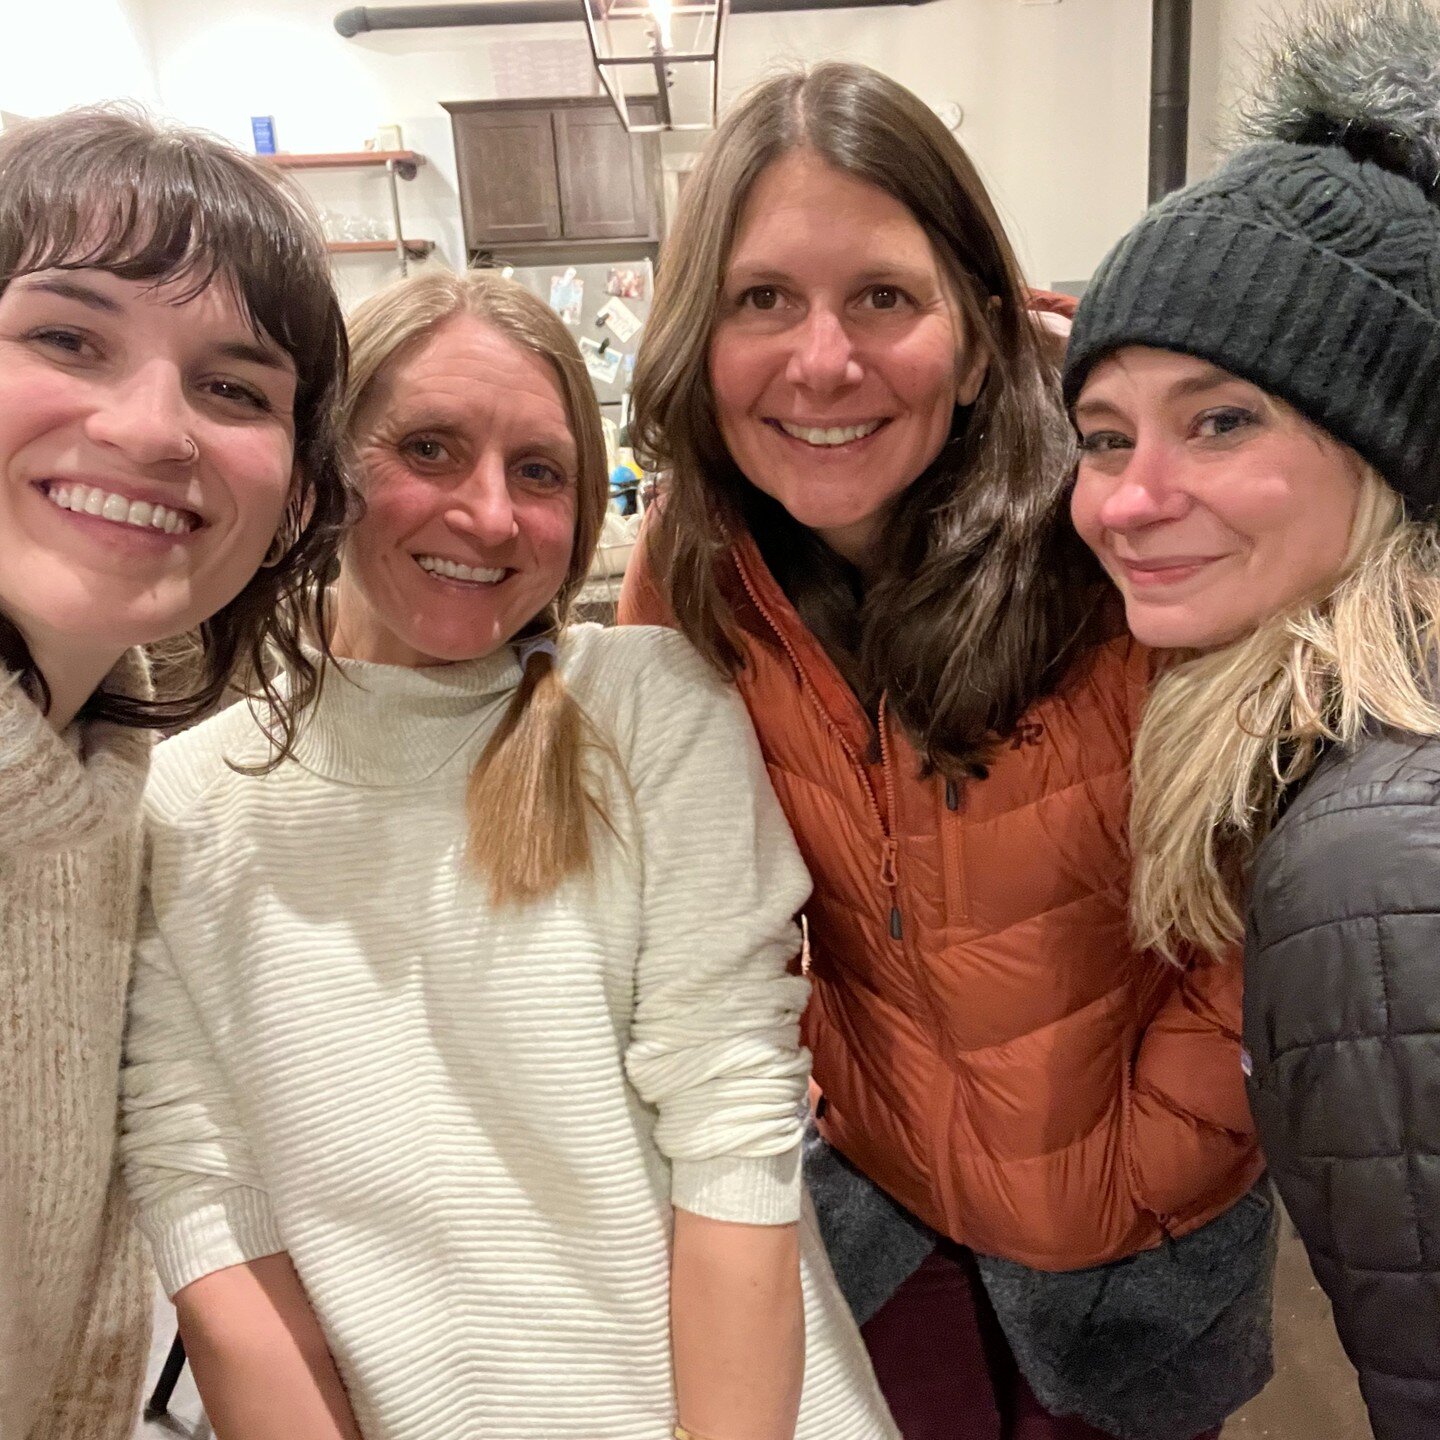 Lander Womentum alumnae dined together in small groups this month and shared favorite life hacks. (Pictured here is one of our dinner groups: Anna, Vanessa, Brie &amp; Heather.)

We plan to offer more alumnae events, so keep an eye out for our posts 